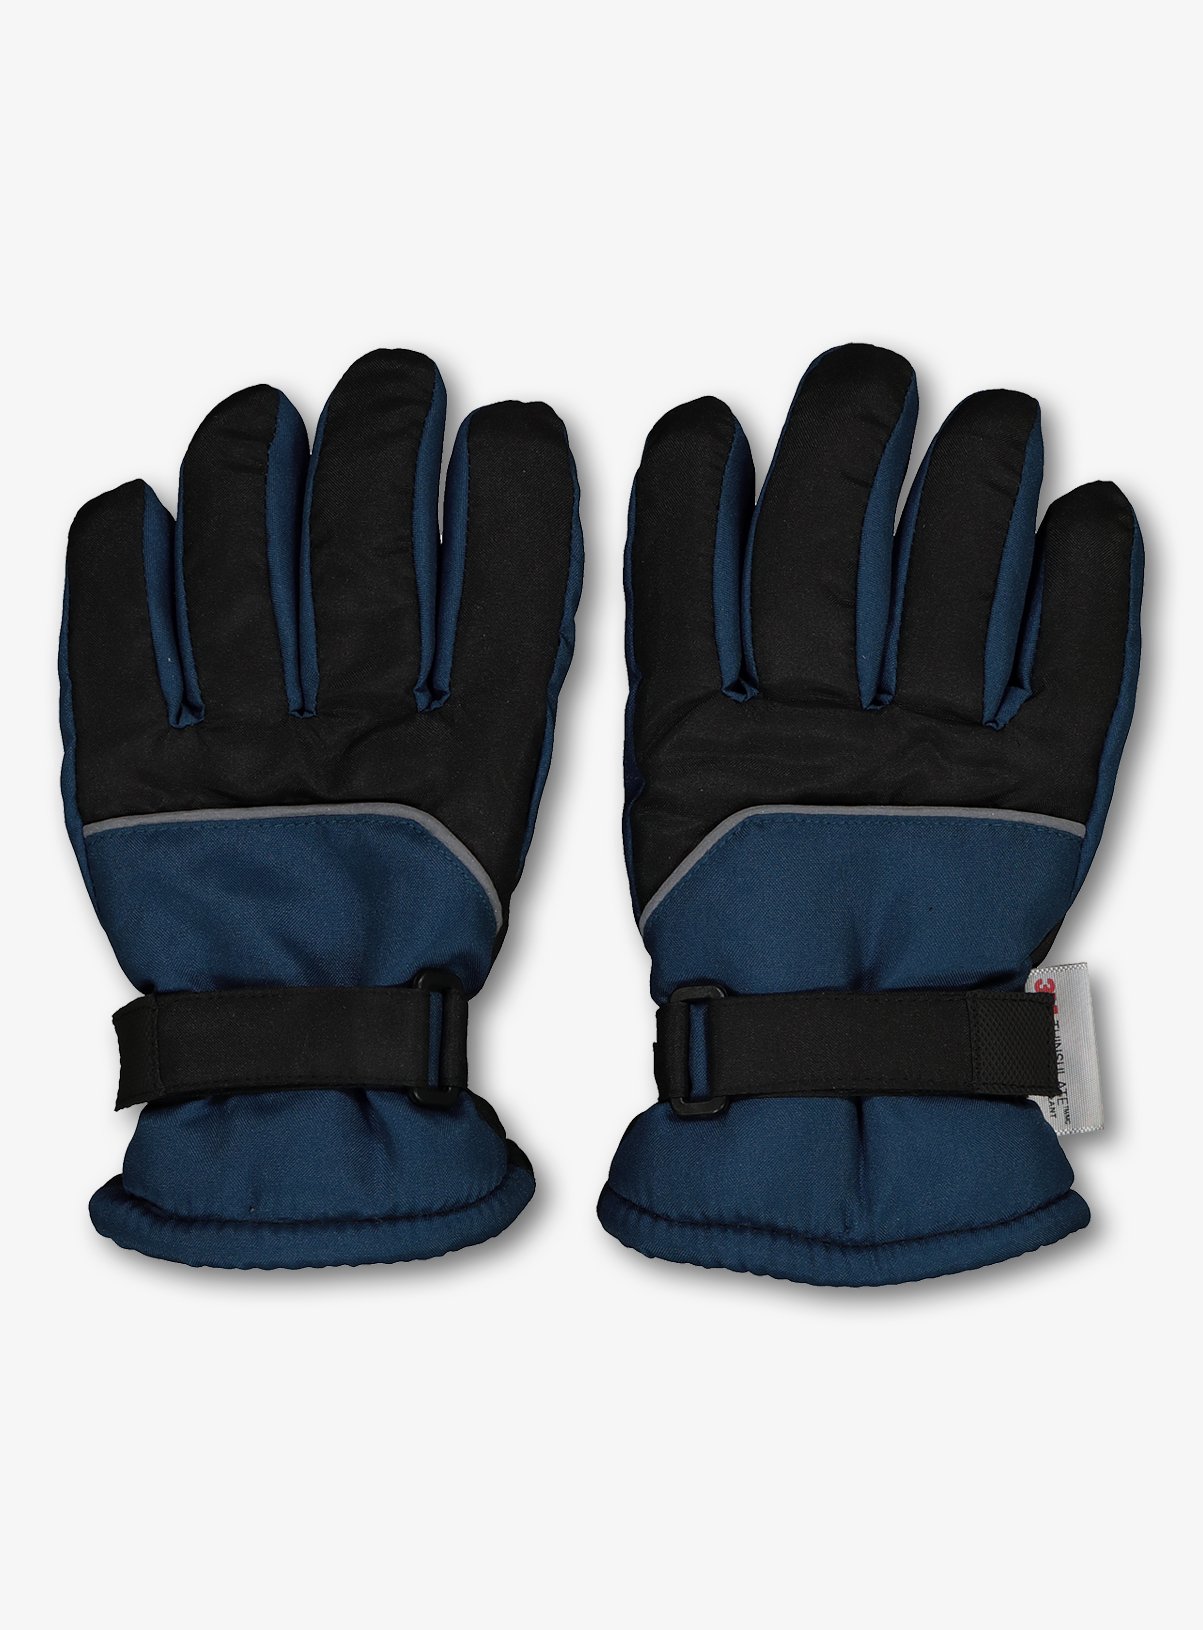 where can i buy snow gloves